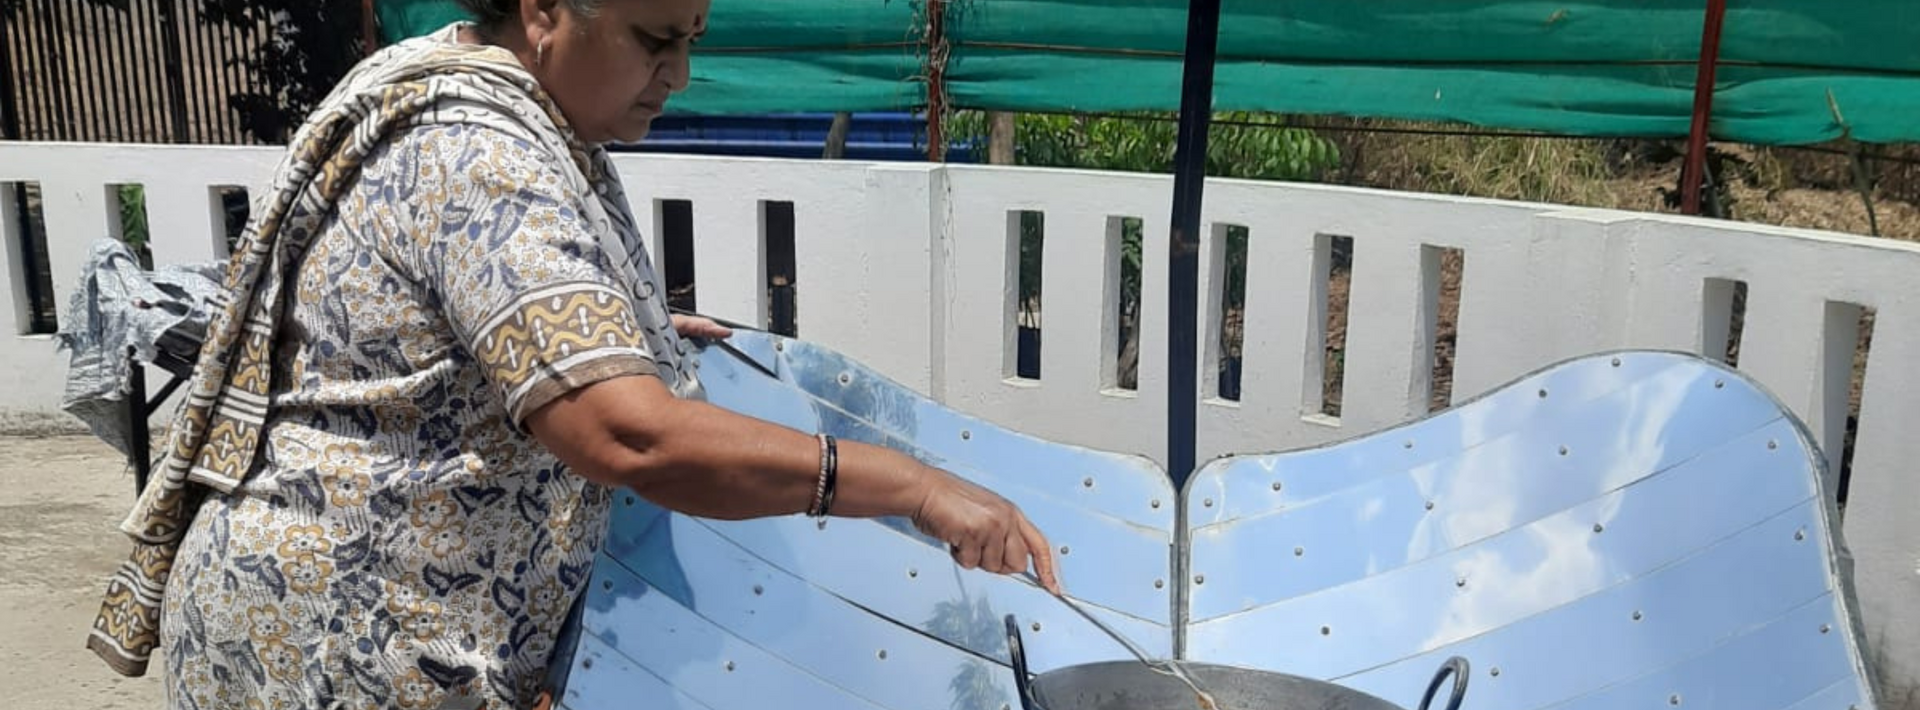 An elderly woman stands on a sunny terrace as she stirs the food in a vessel, resting on a parabolic metal dish.